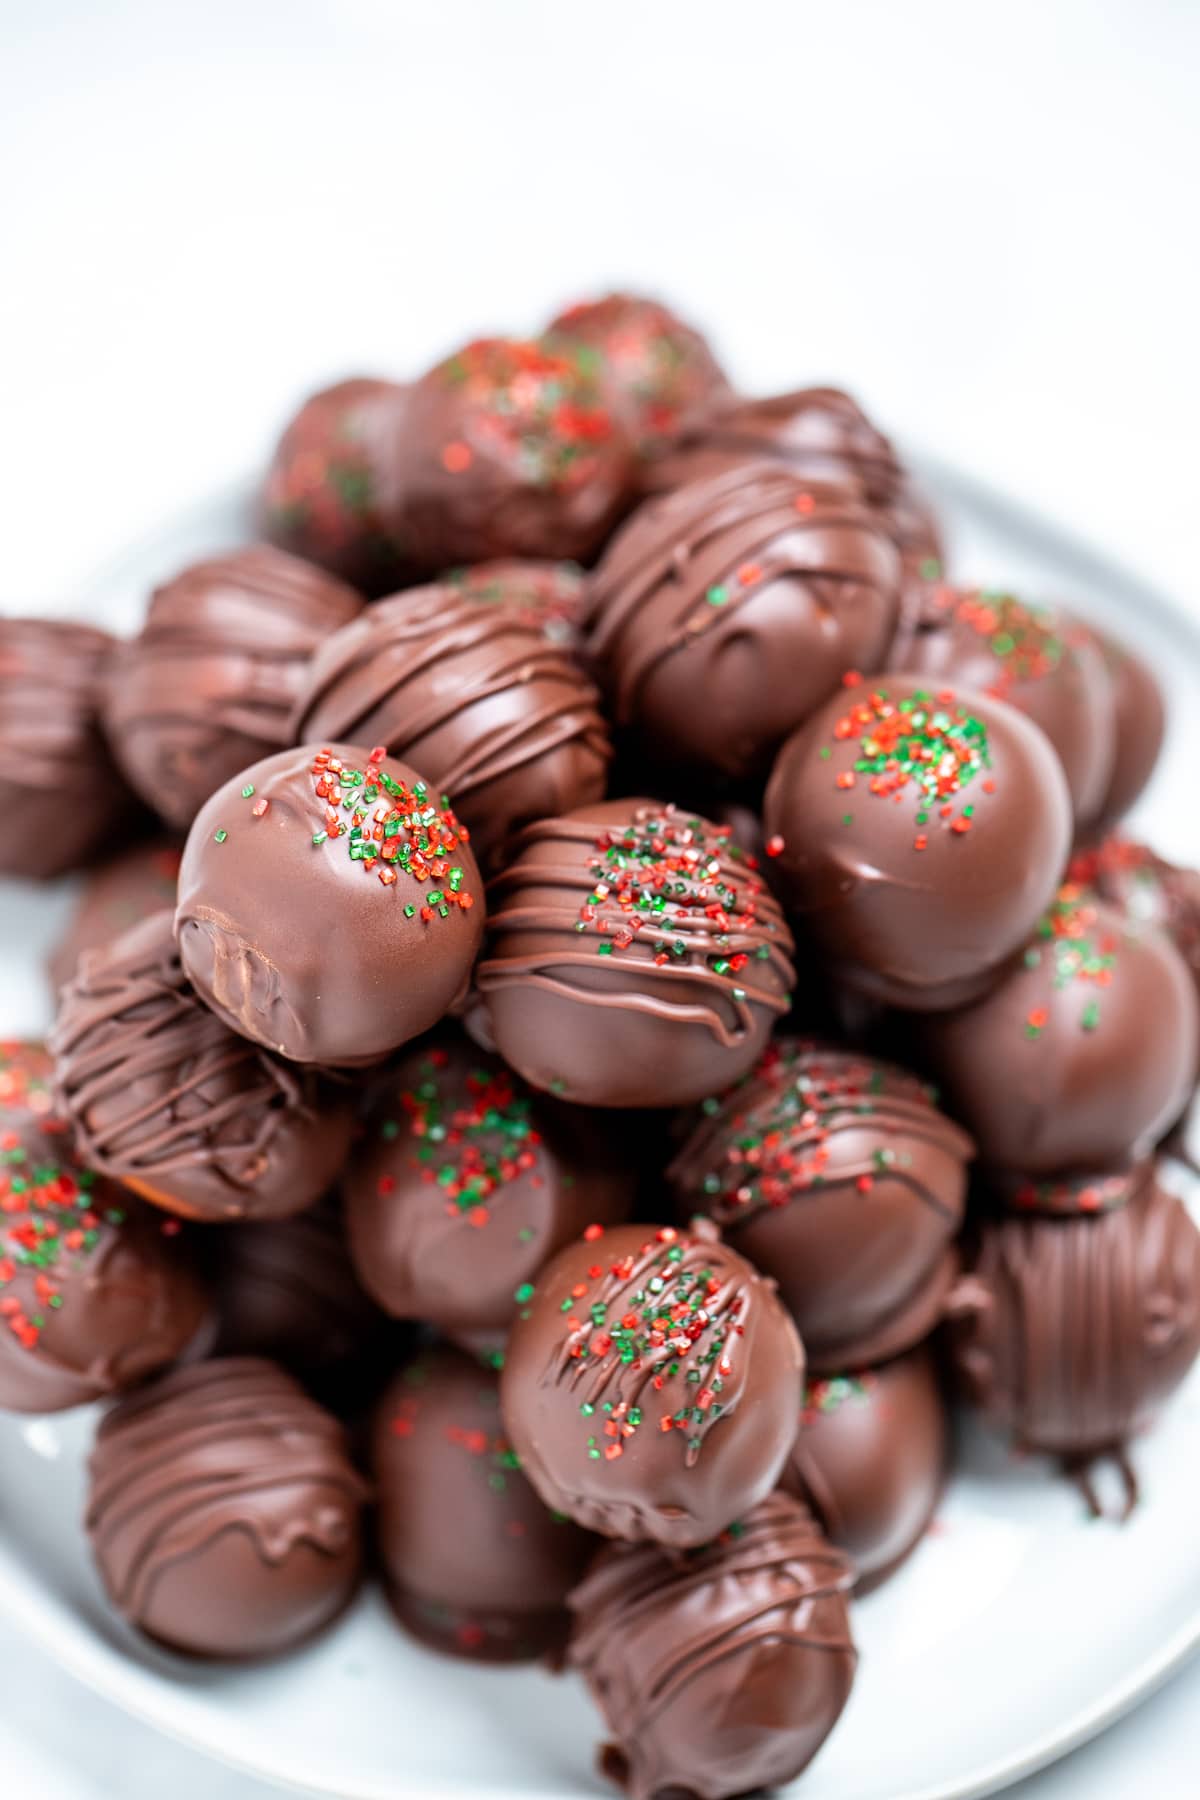 Chocolate covered peanut butter balls topped with drizzled chocolate and sprinkles on a plate on a table.